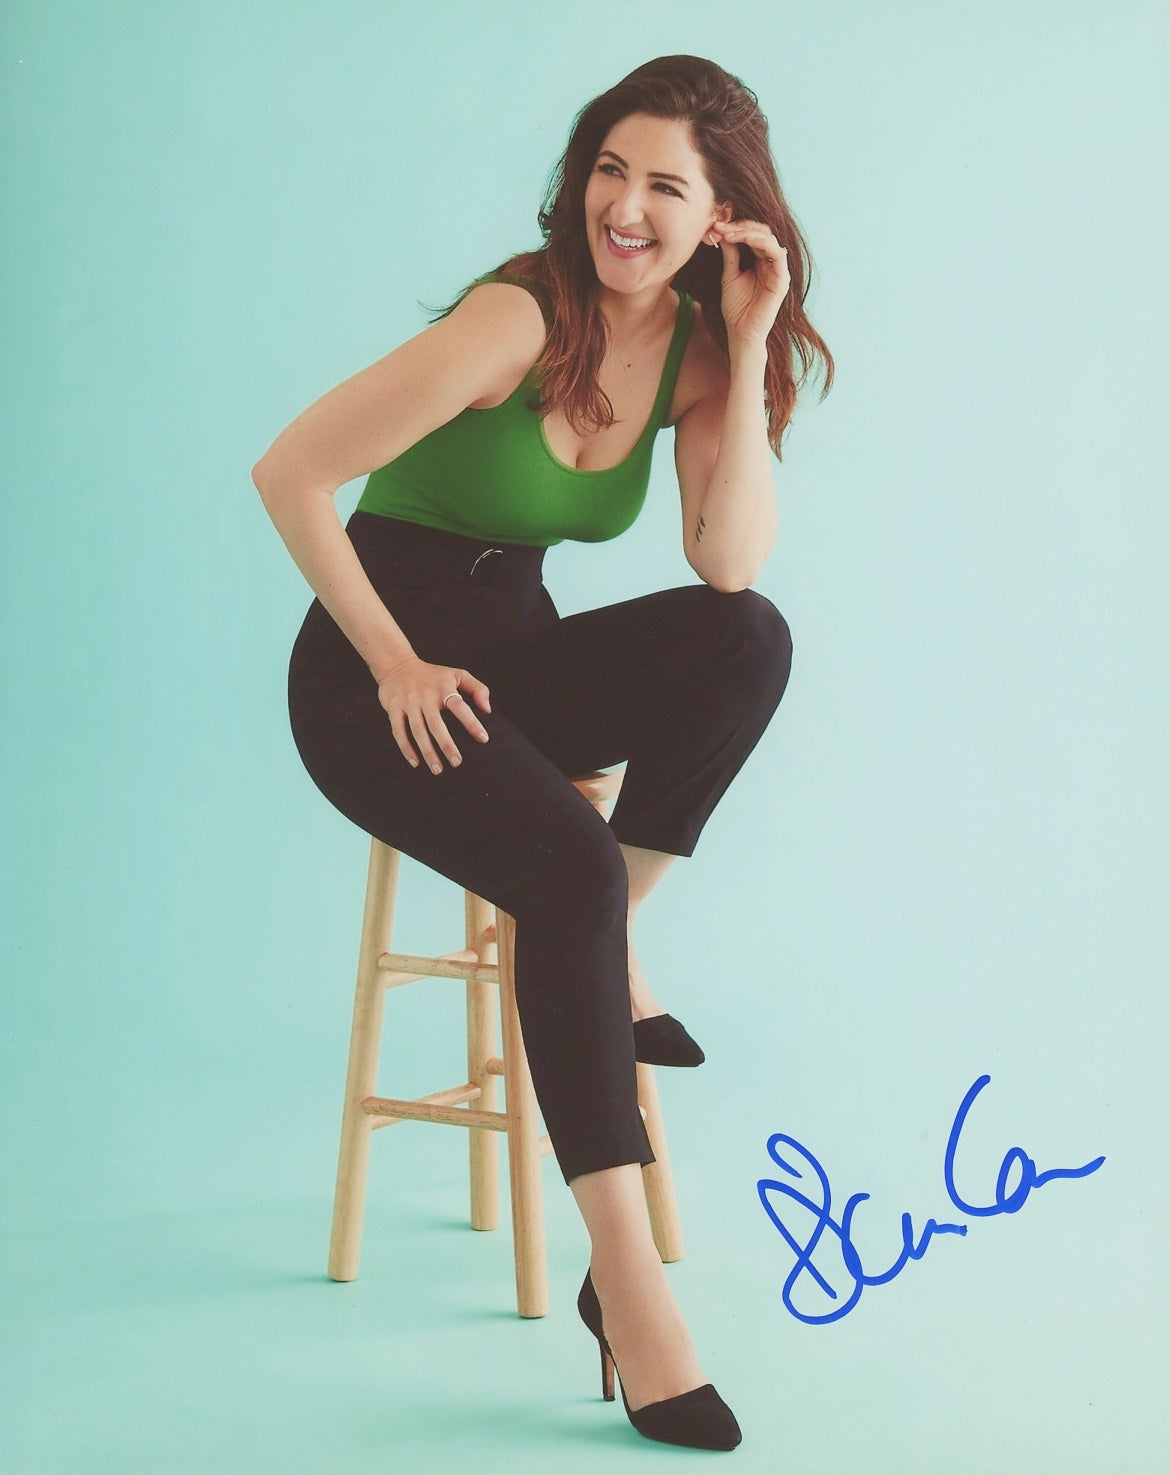 D'Arcy Carden Signed 8x10 Photo